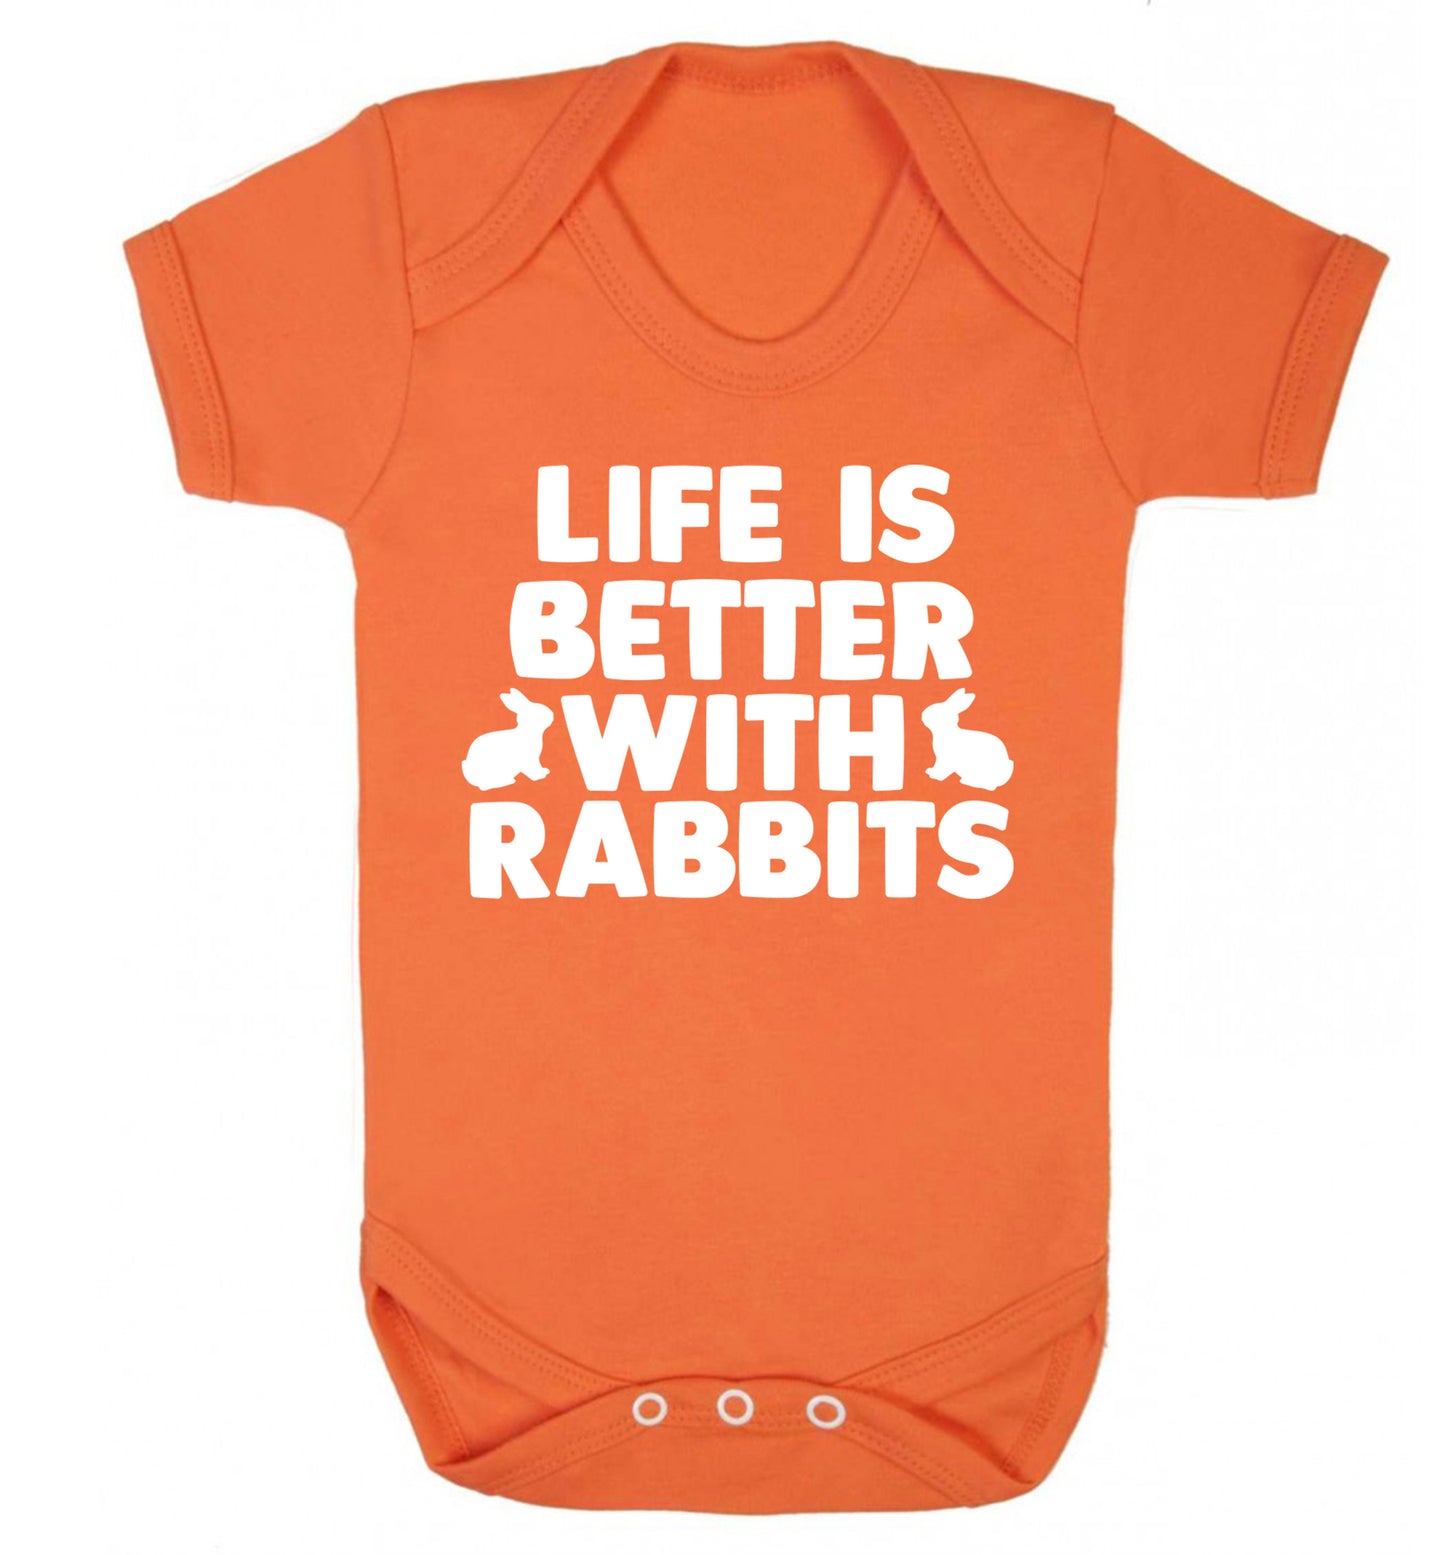 Life is better with rabbits Baby Vest orange 18-24 months